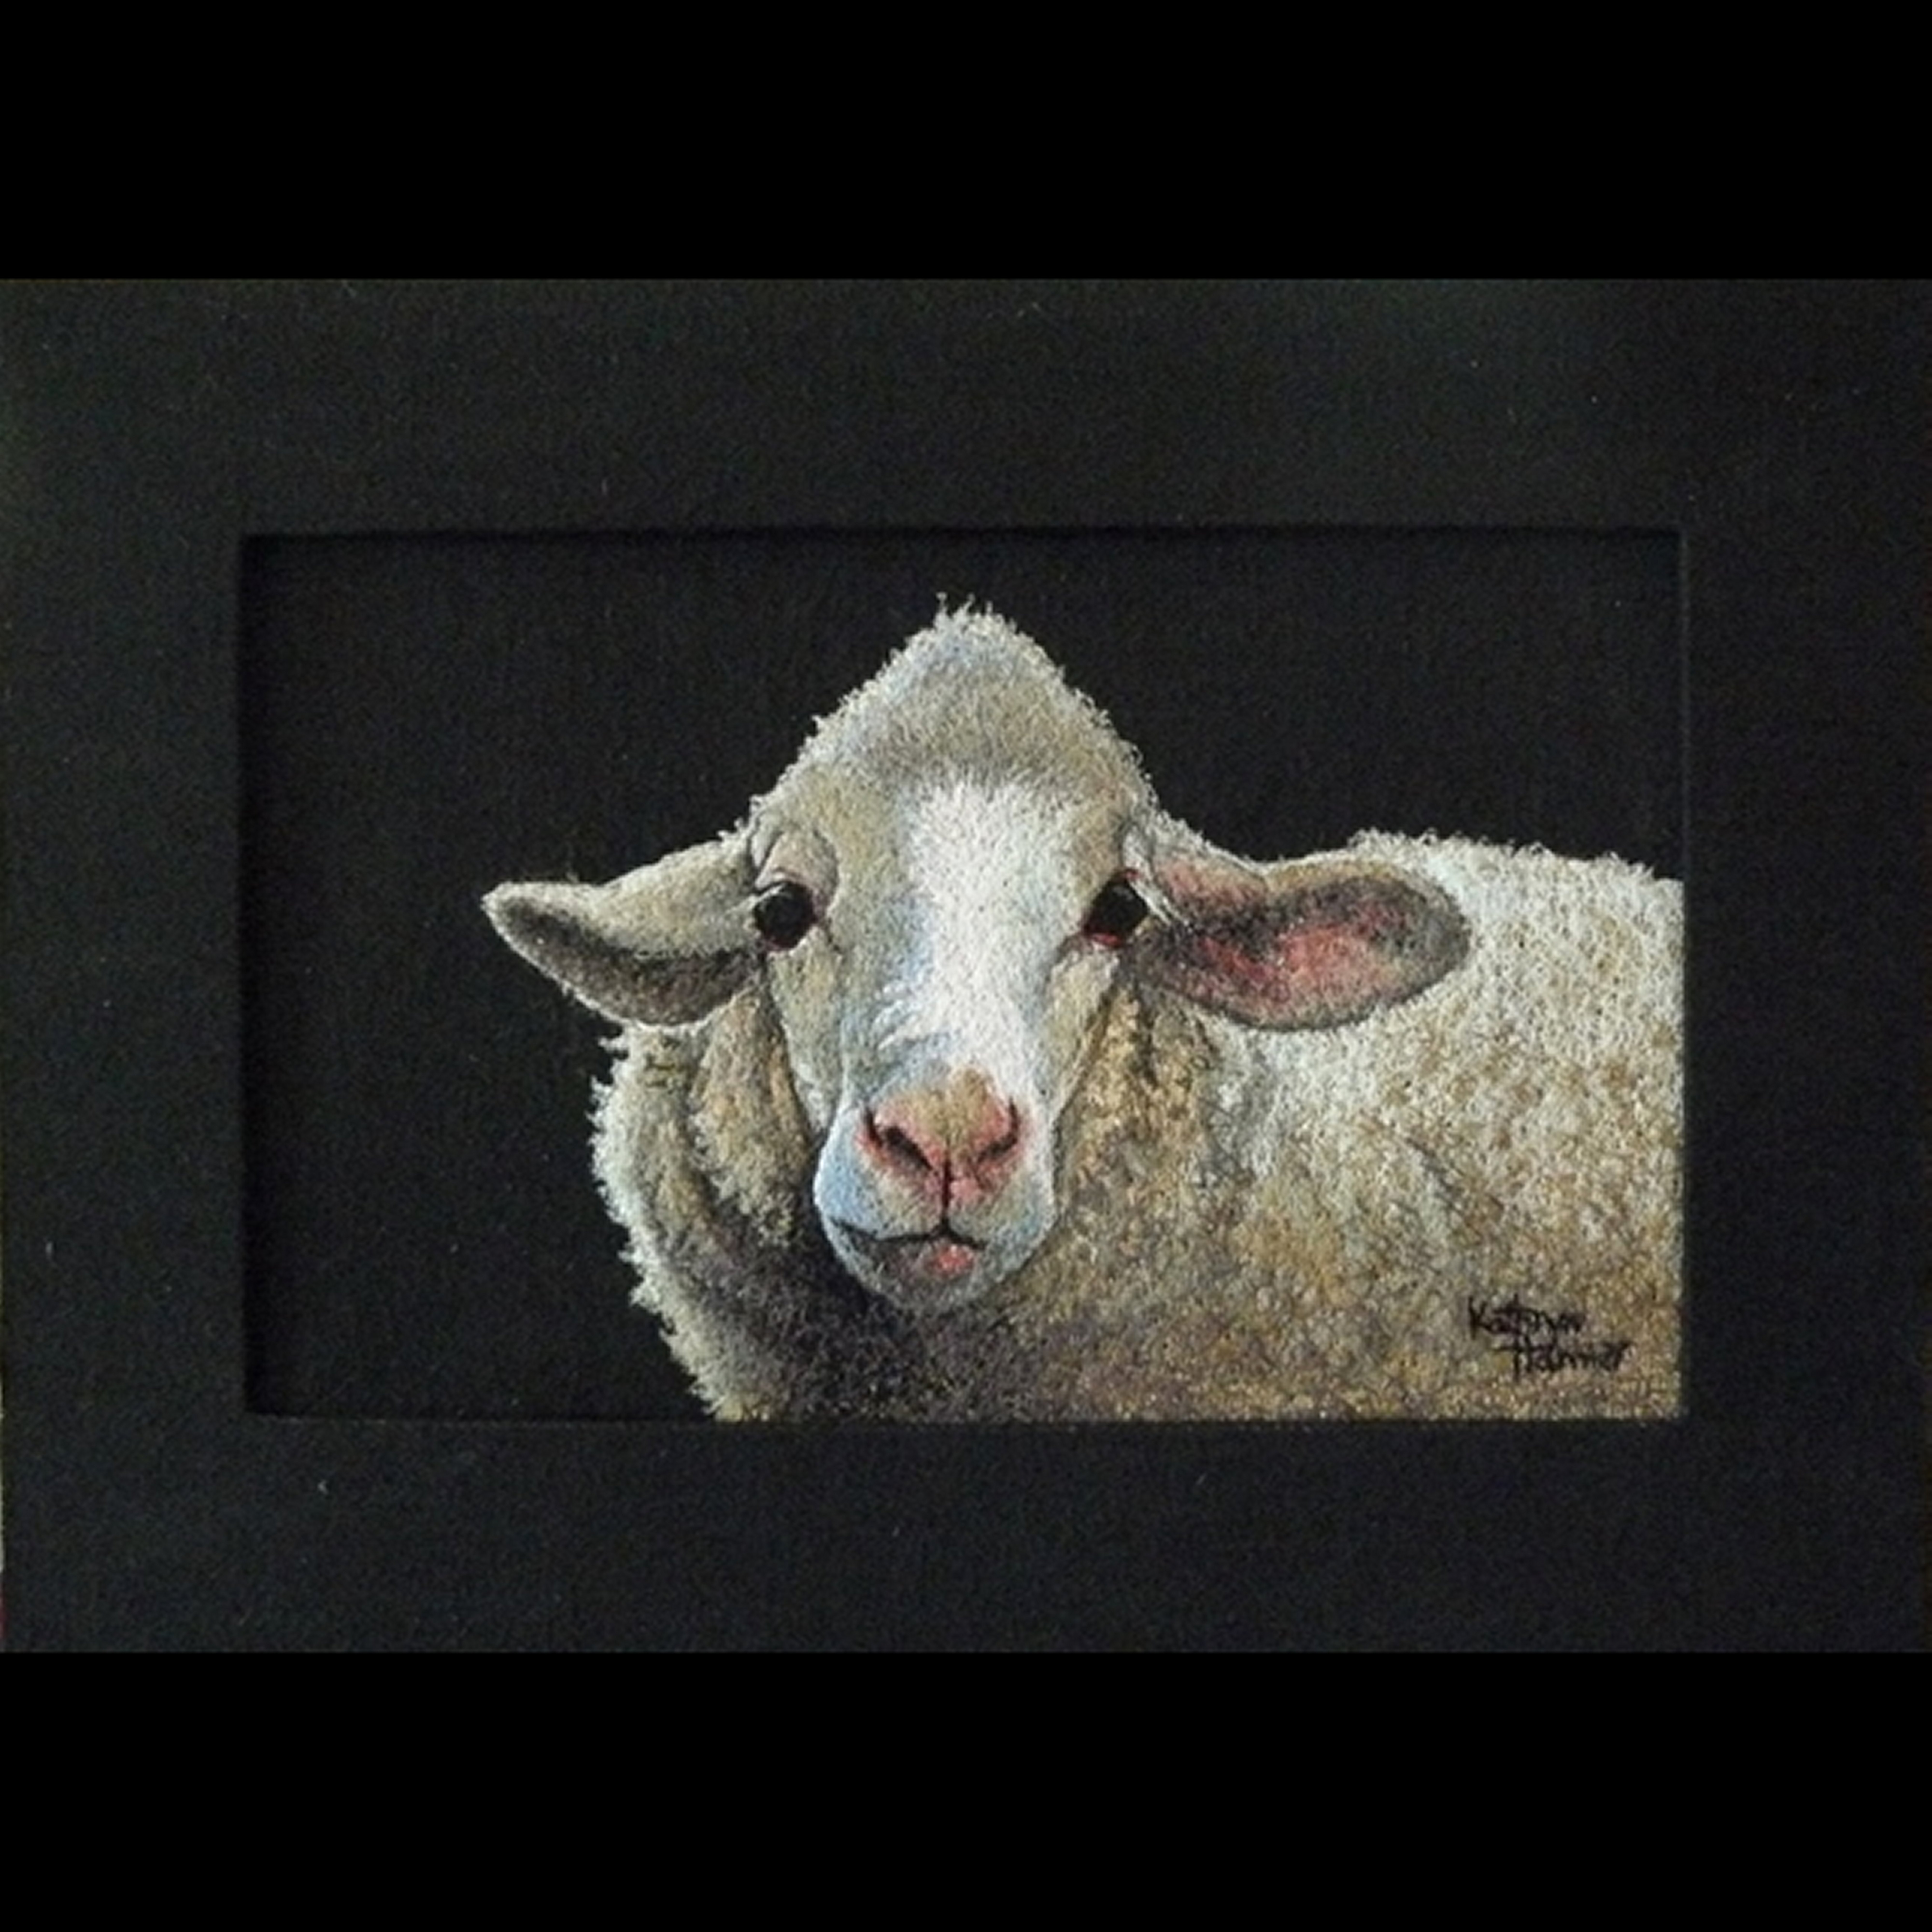 Portrait of a Sheep Named Jeanette 2